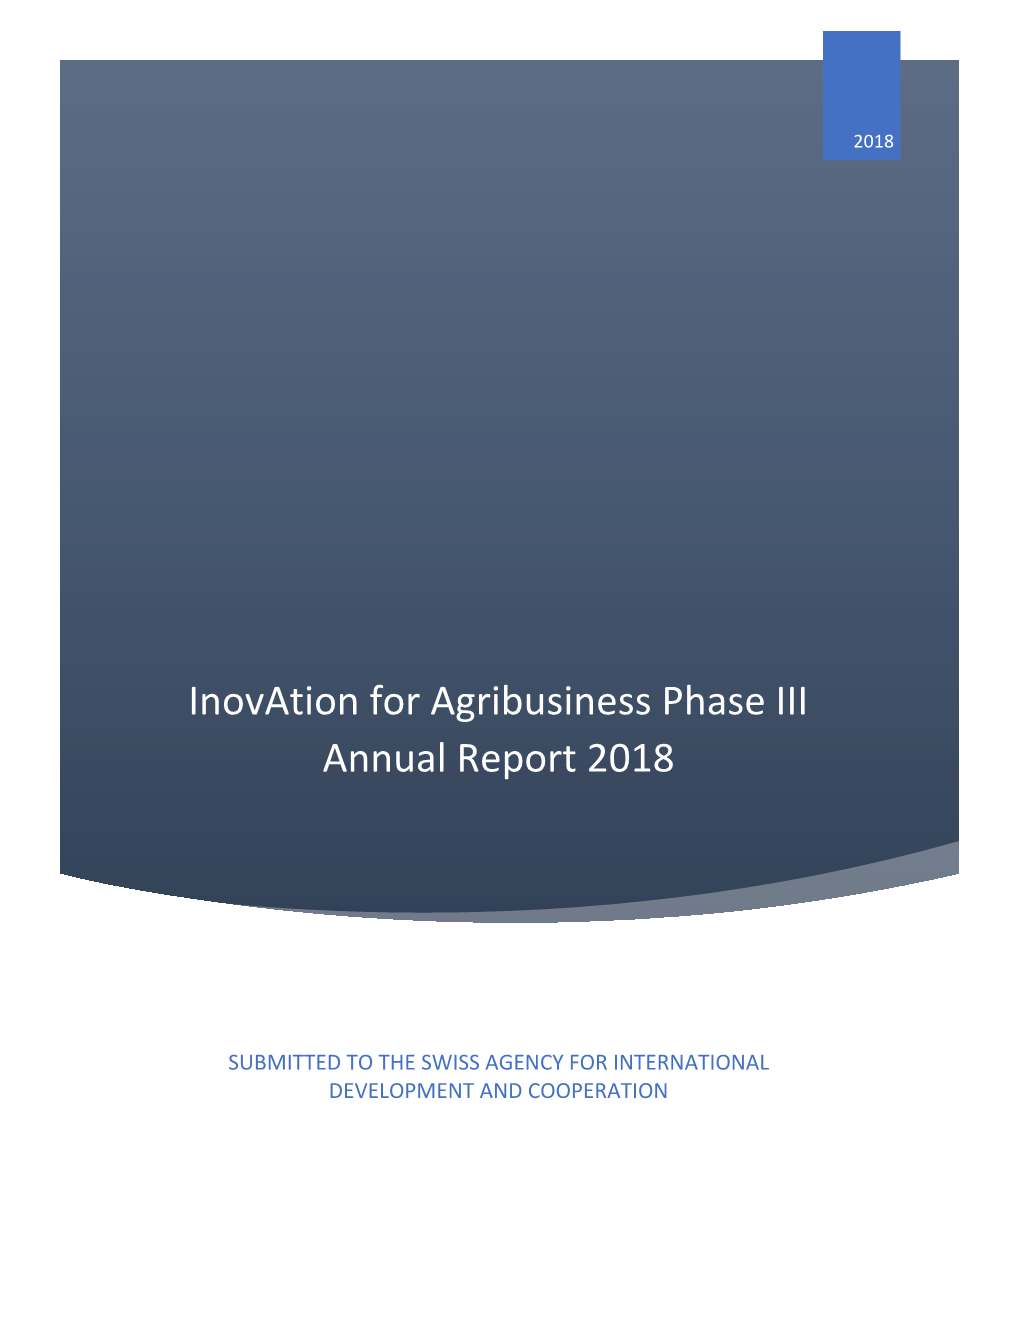 Inovation for Agribusiness Phase III Annual Report 2018